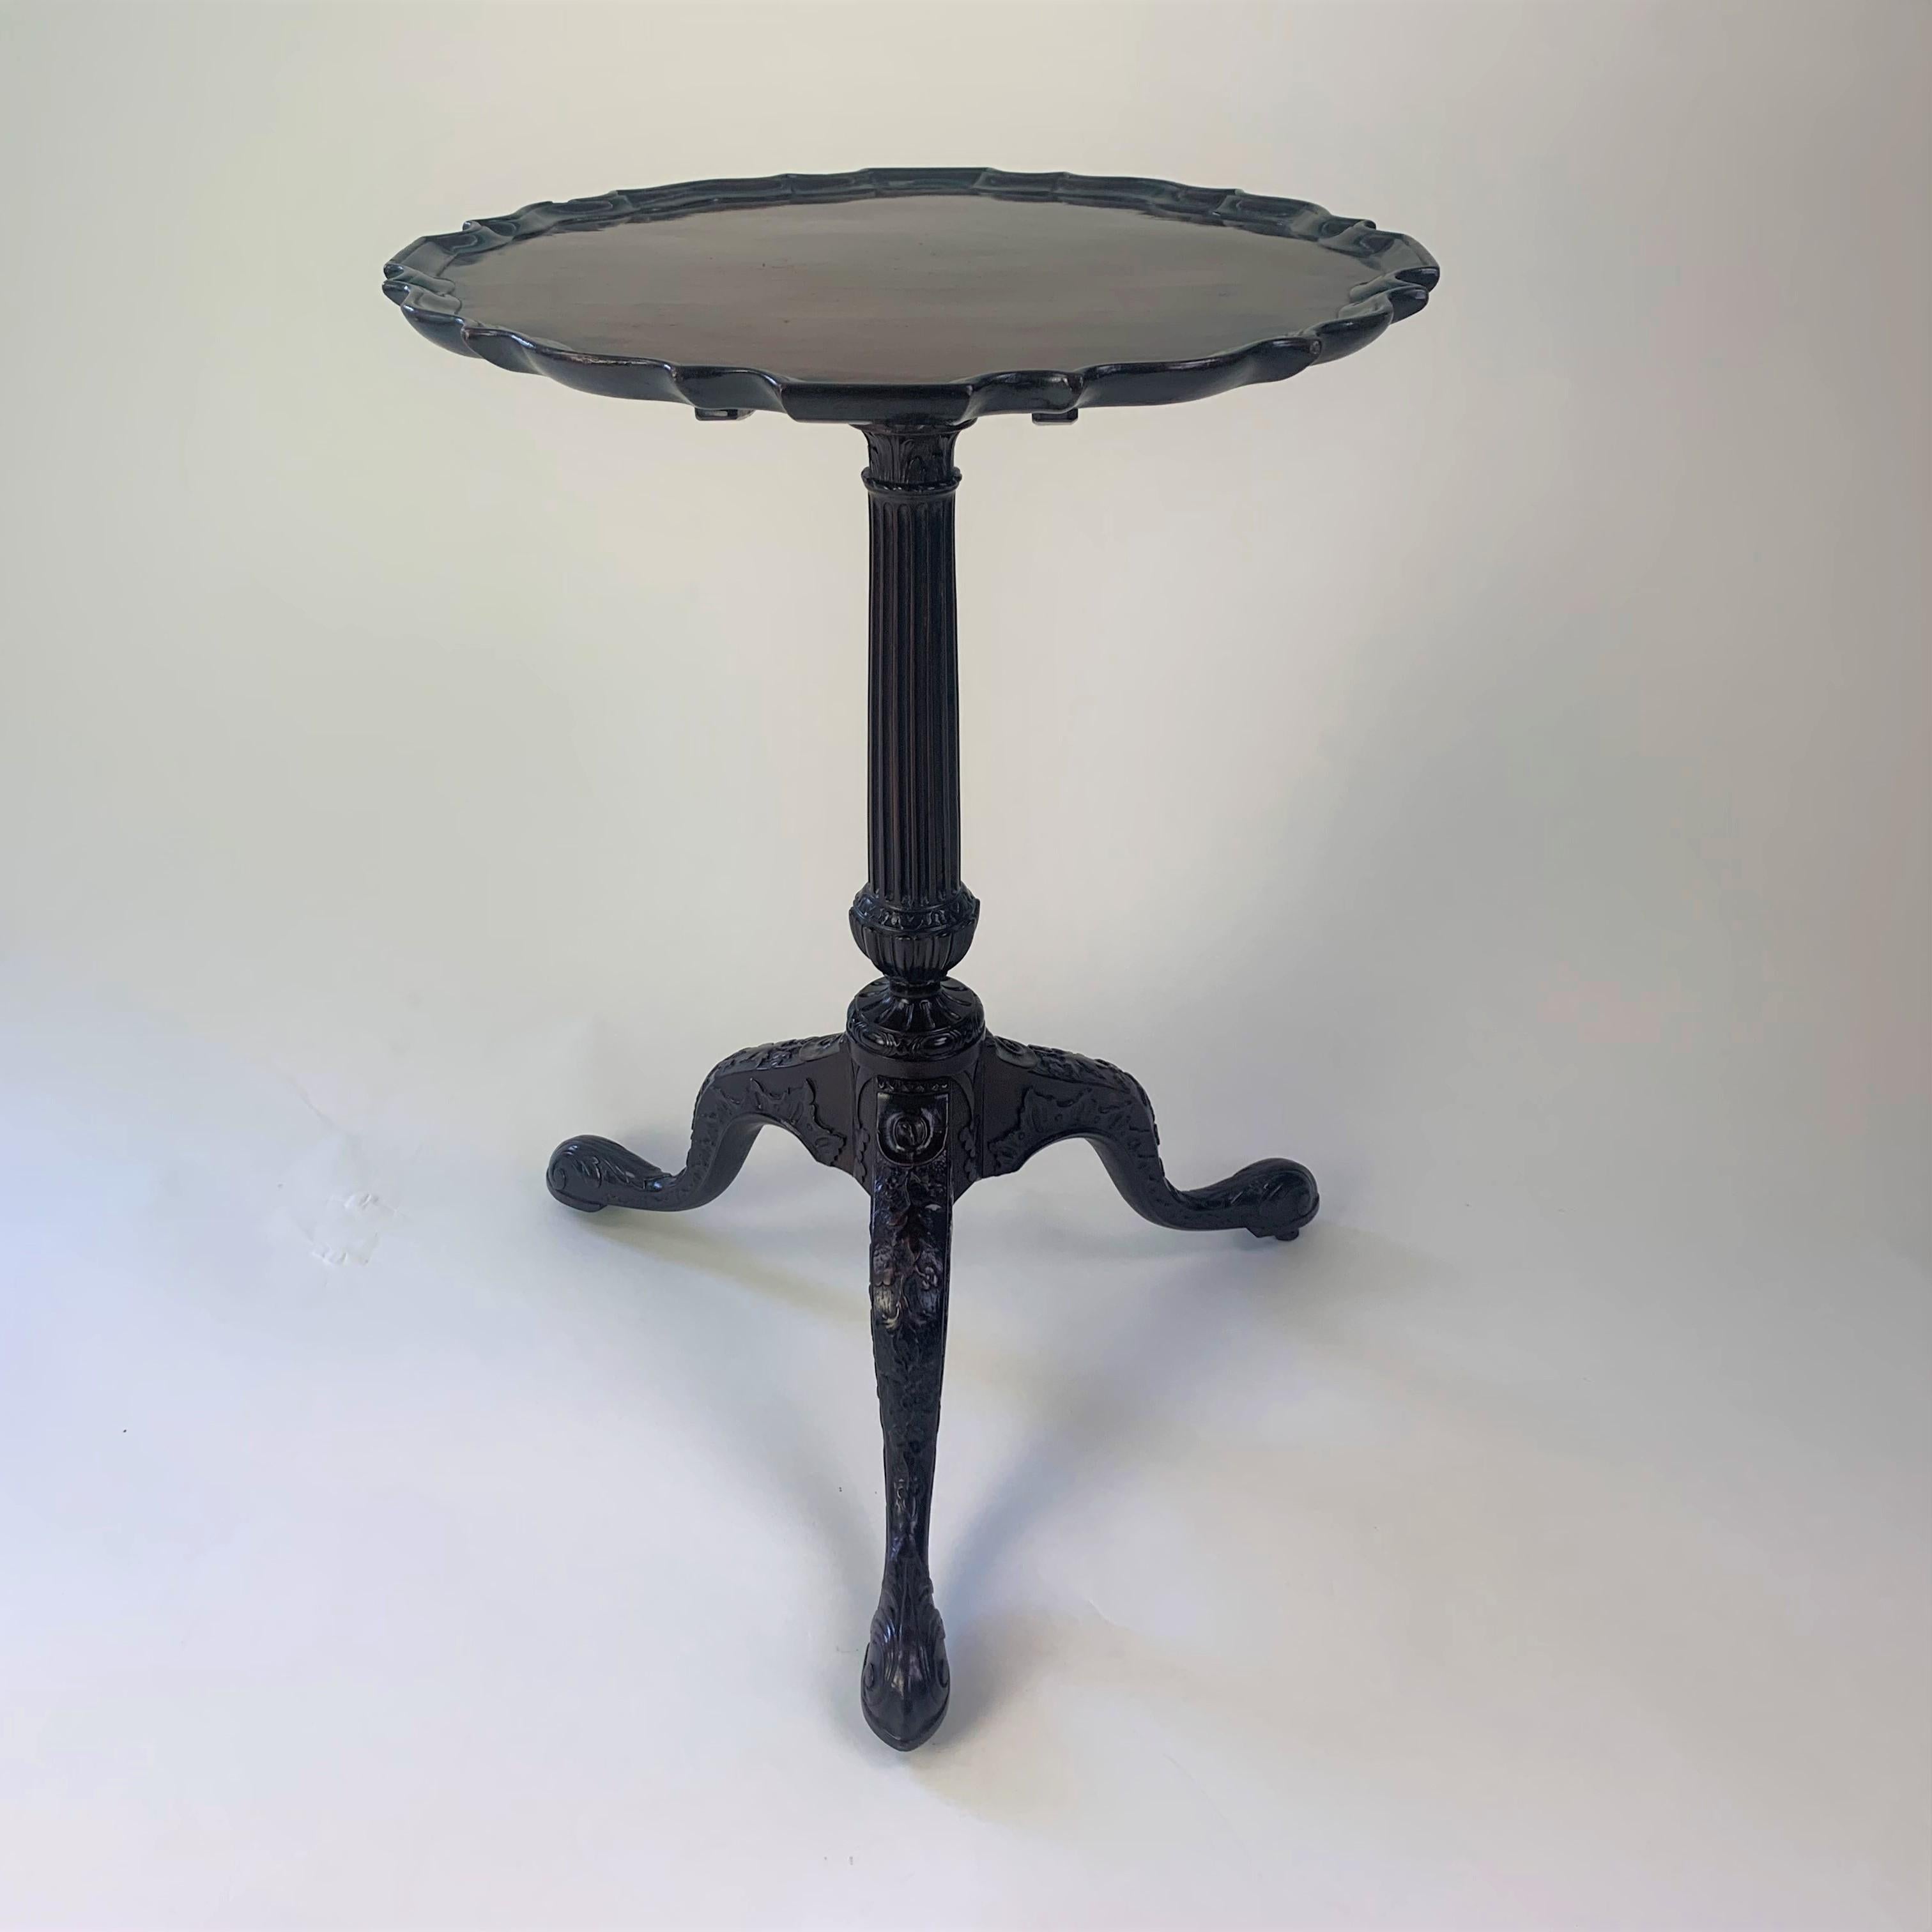 An outstanding mid 18th century figured mahogany tripod table. The one-piece top with finely carved pie-crust edge supported on a profusely carved 'blind-fret' base with fluted column carved to both the capital and base, raised on cabriole legs